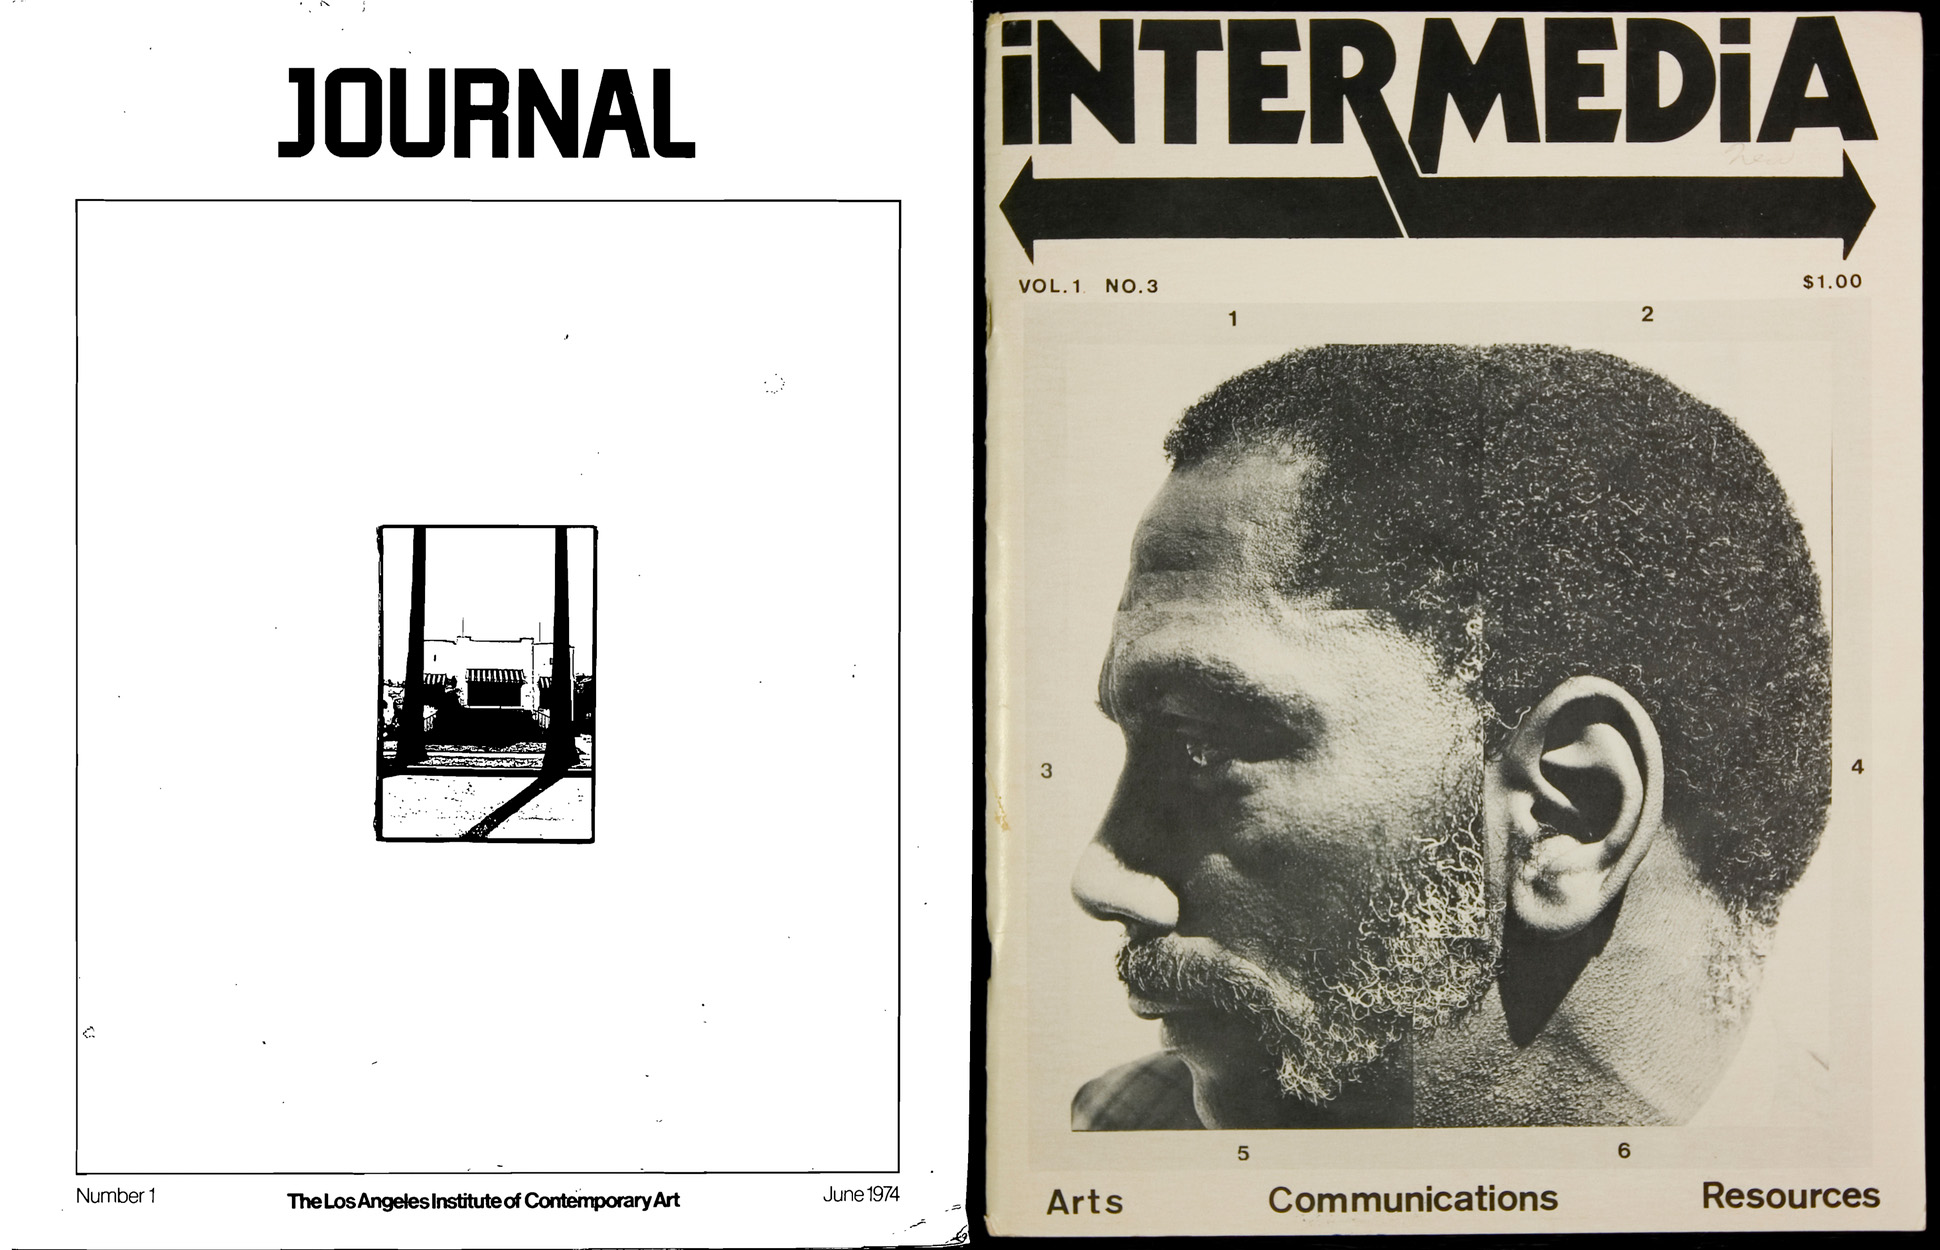 Left: Cover of <em>LAICA Journal</em></a> Vol. 1, Issue 1 (June 1974). Courtesy of Robert Smith. Right: Cover of <em>Intermedia</em> Vol. 1, Issue 3 (1975). Courtesy of Harley Lond. To download a PDF of <em> LAICA Journal</em> Vol. 1, Issue 1 (June 1974), click <a href="http://s3.amazonaws.com/eob_texts-production/texts/91/1326838015_Excerpt%20from%20LAICA%20Journal%20Number%201%20June%201974.pdf?1326838015" target="_blank">here</a>.